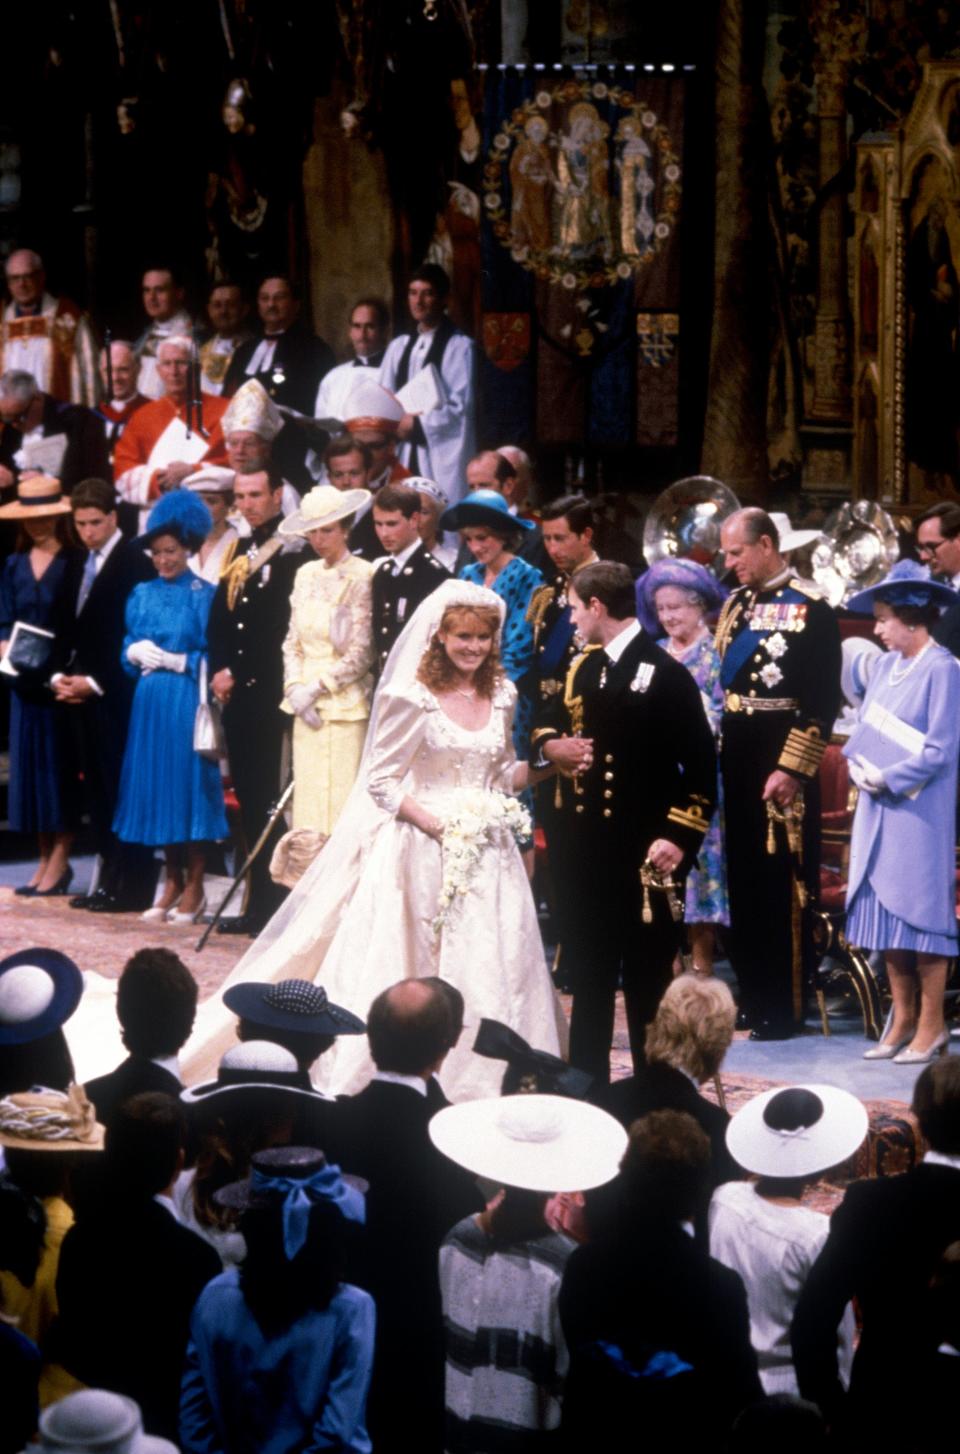 Sarah Ferguson and Prince Andrew walk down the aisle at their wedding at Westminster Abbey.